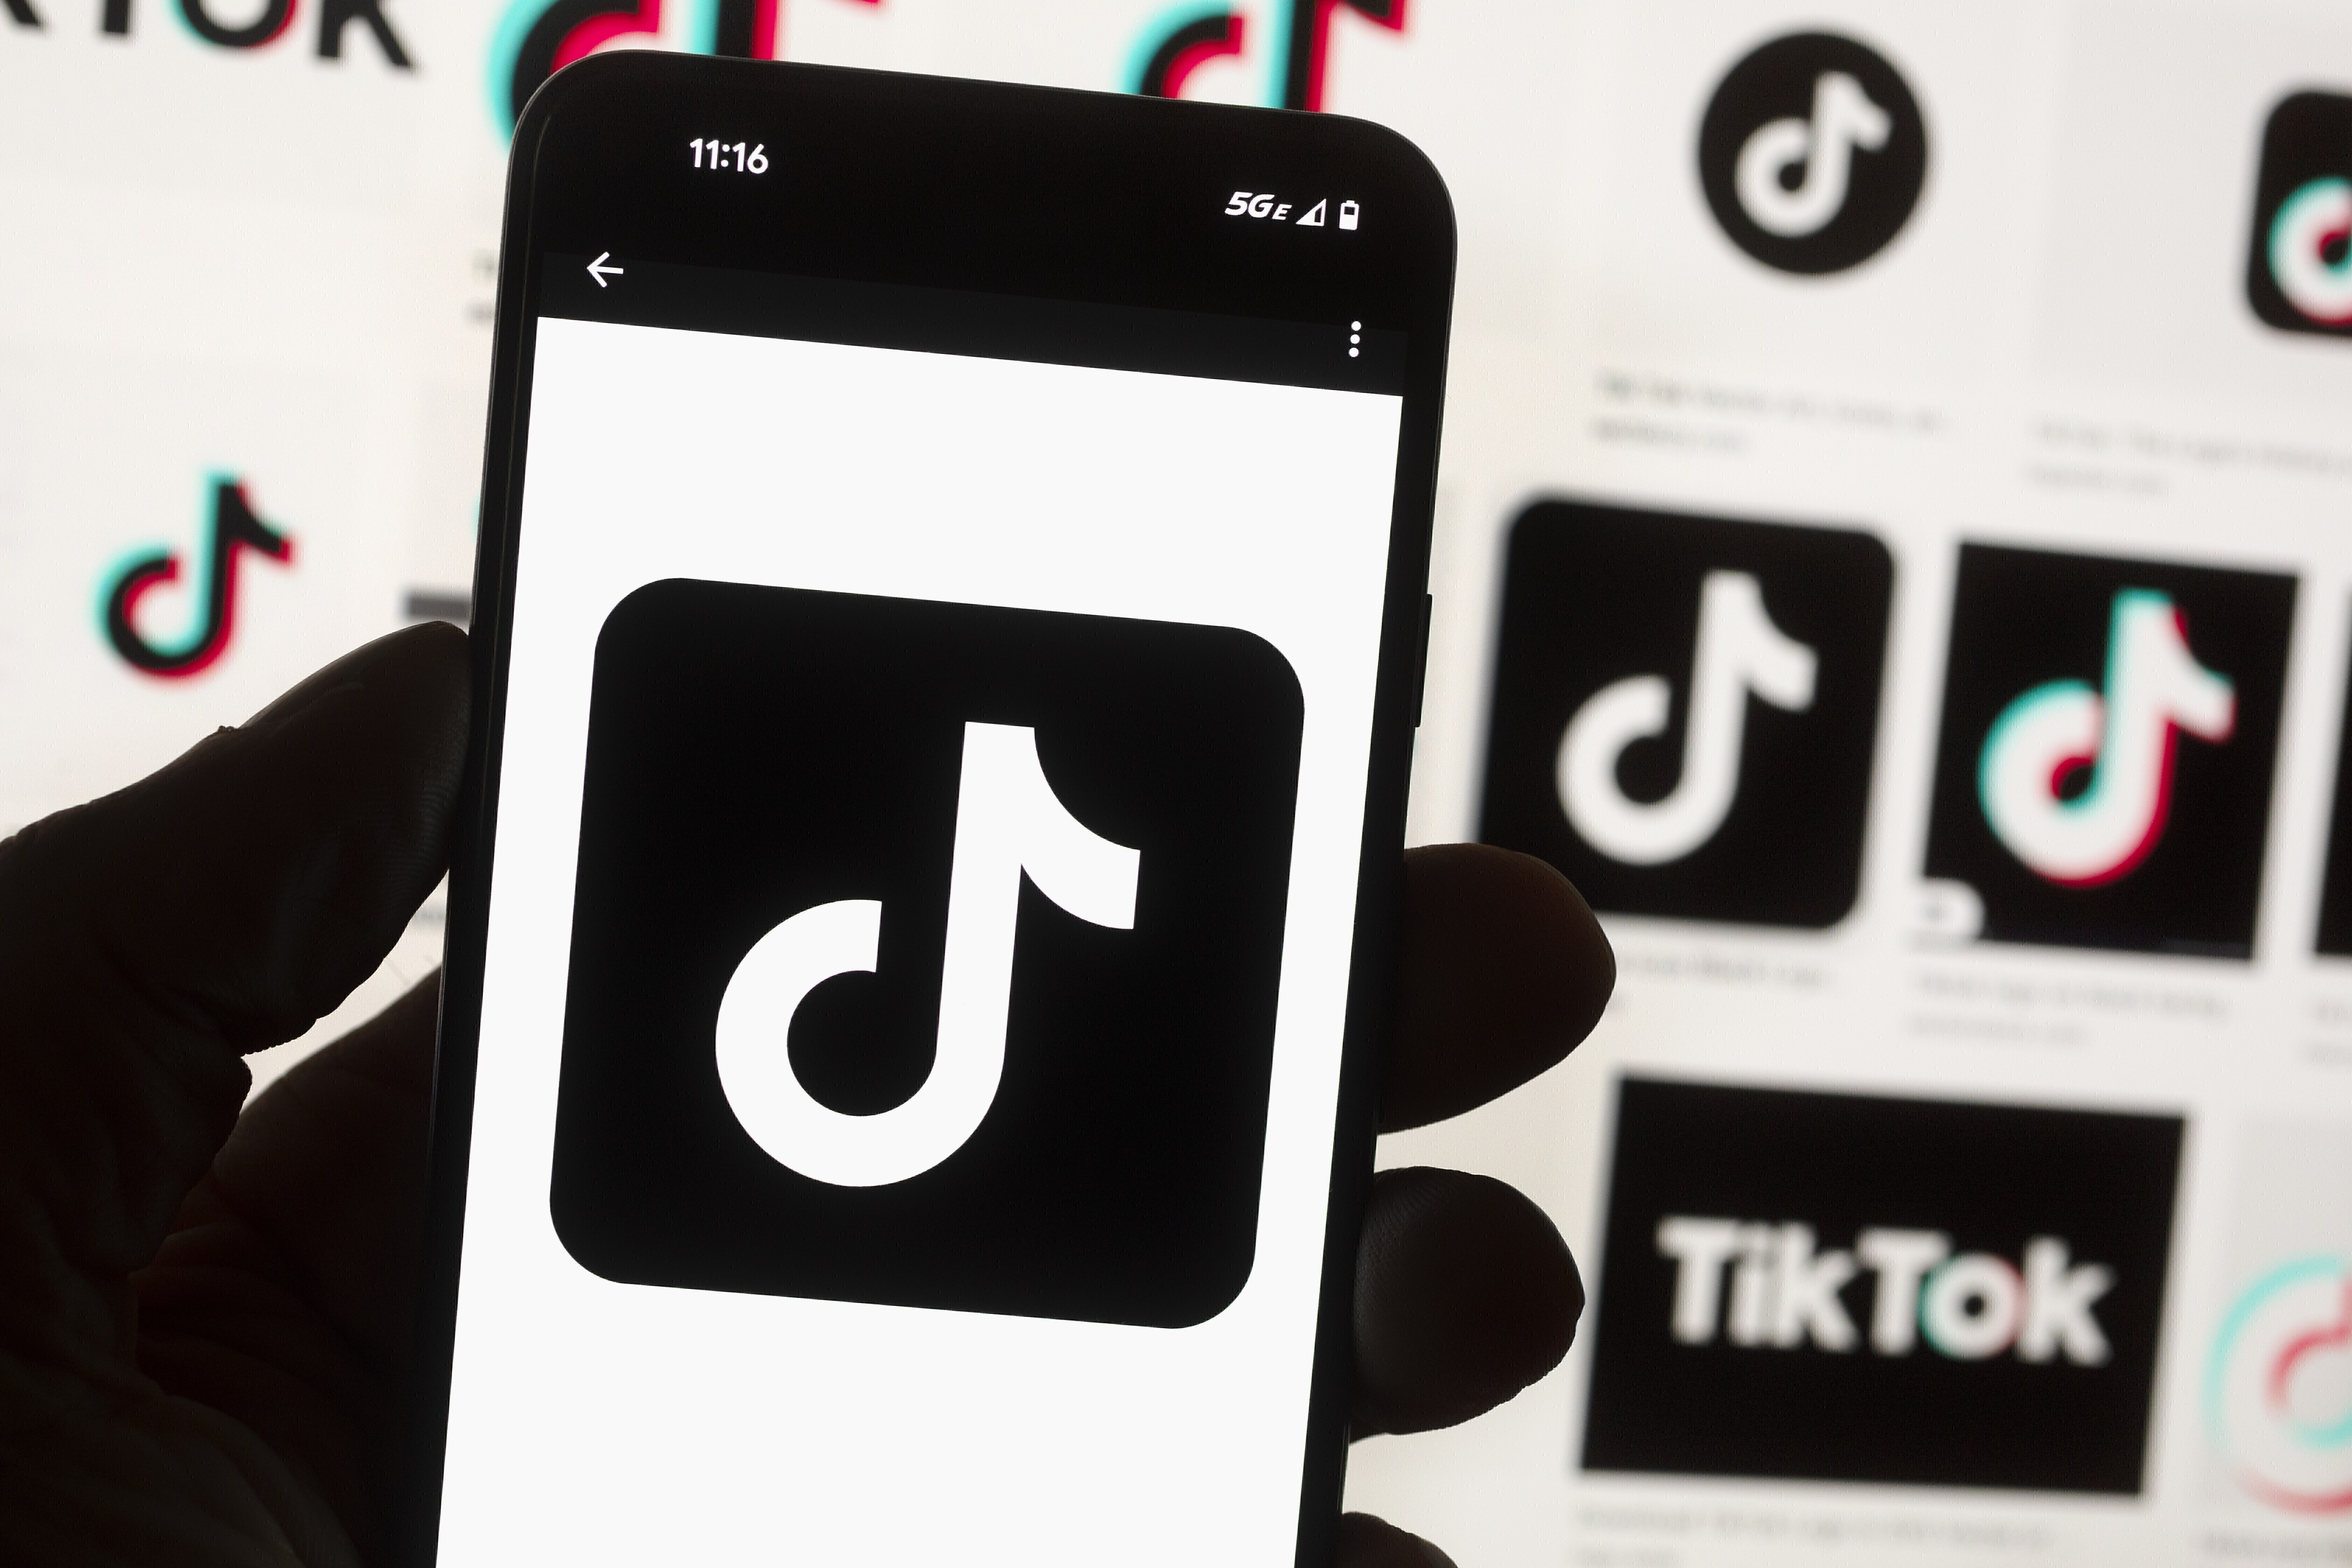 TikTok captures user data more aggressively than other apps (AP)